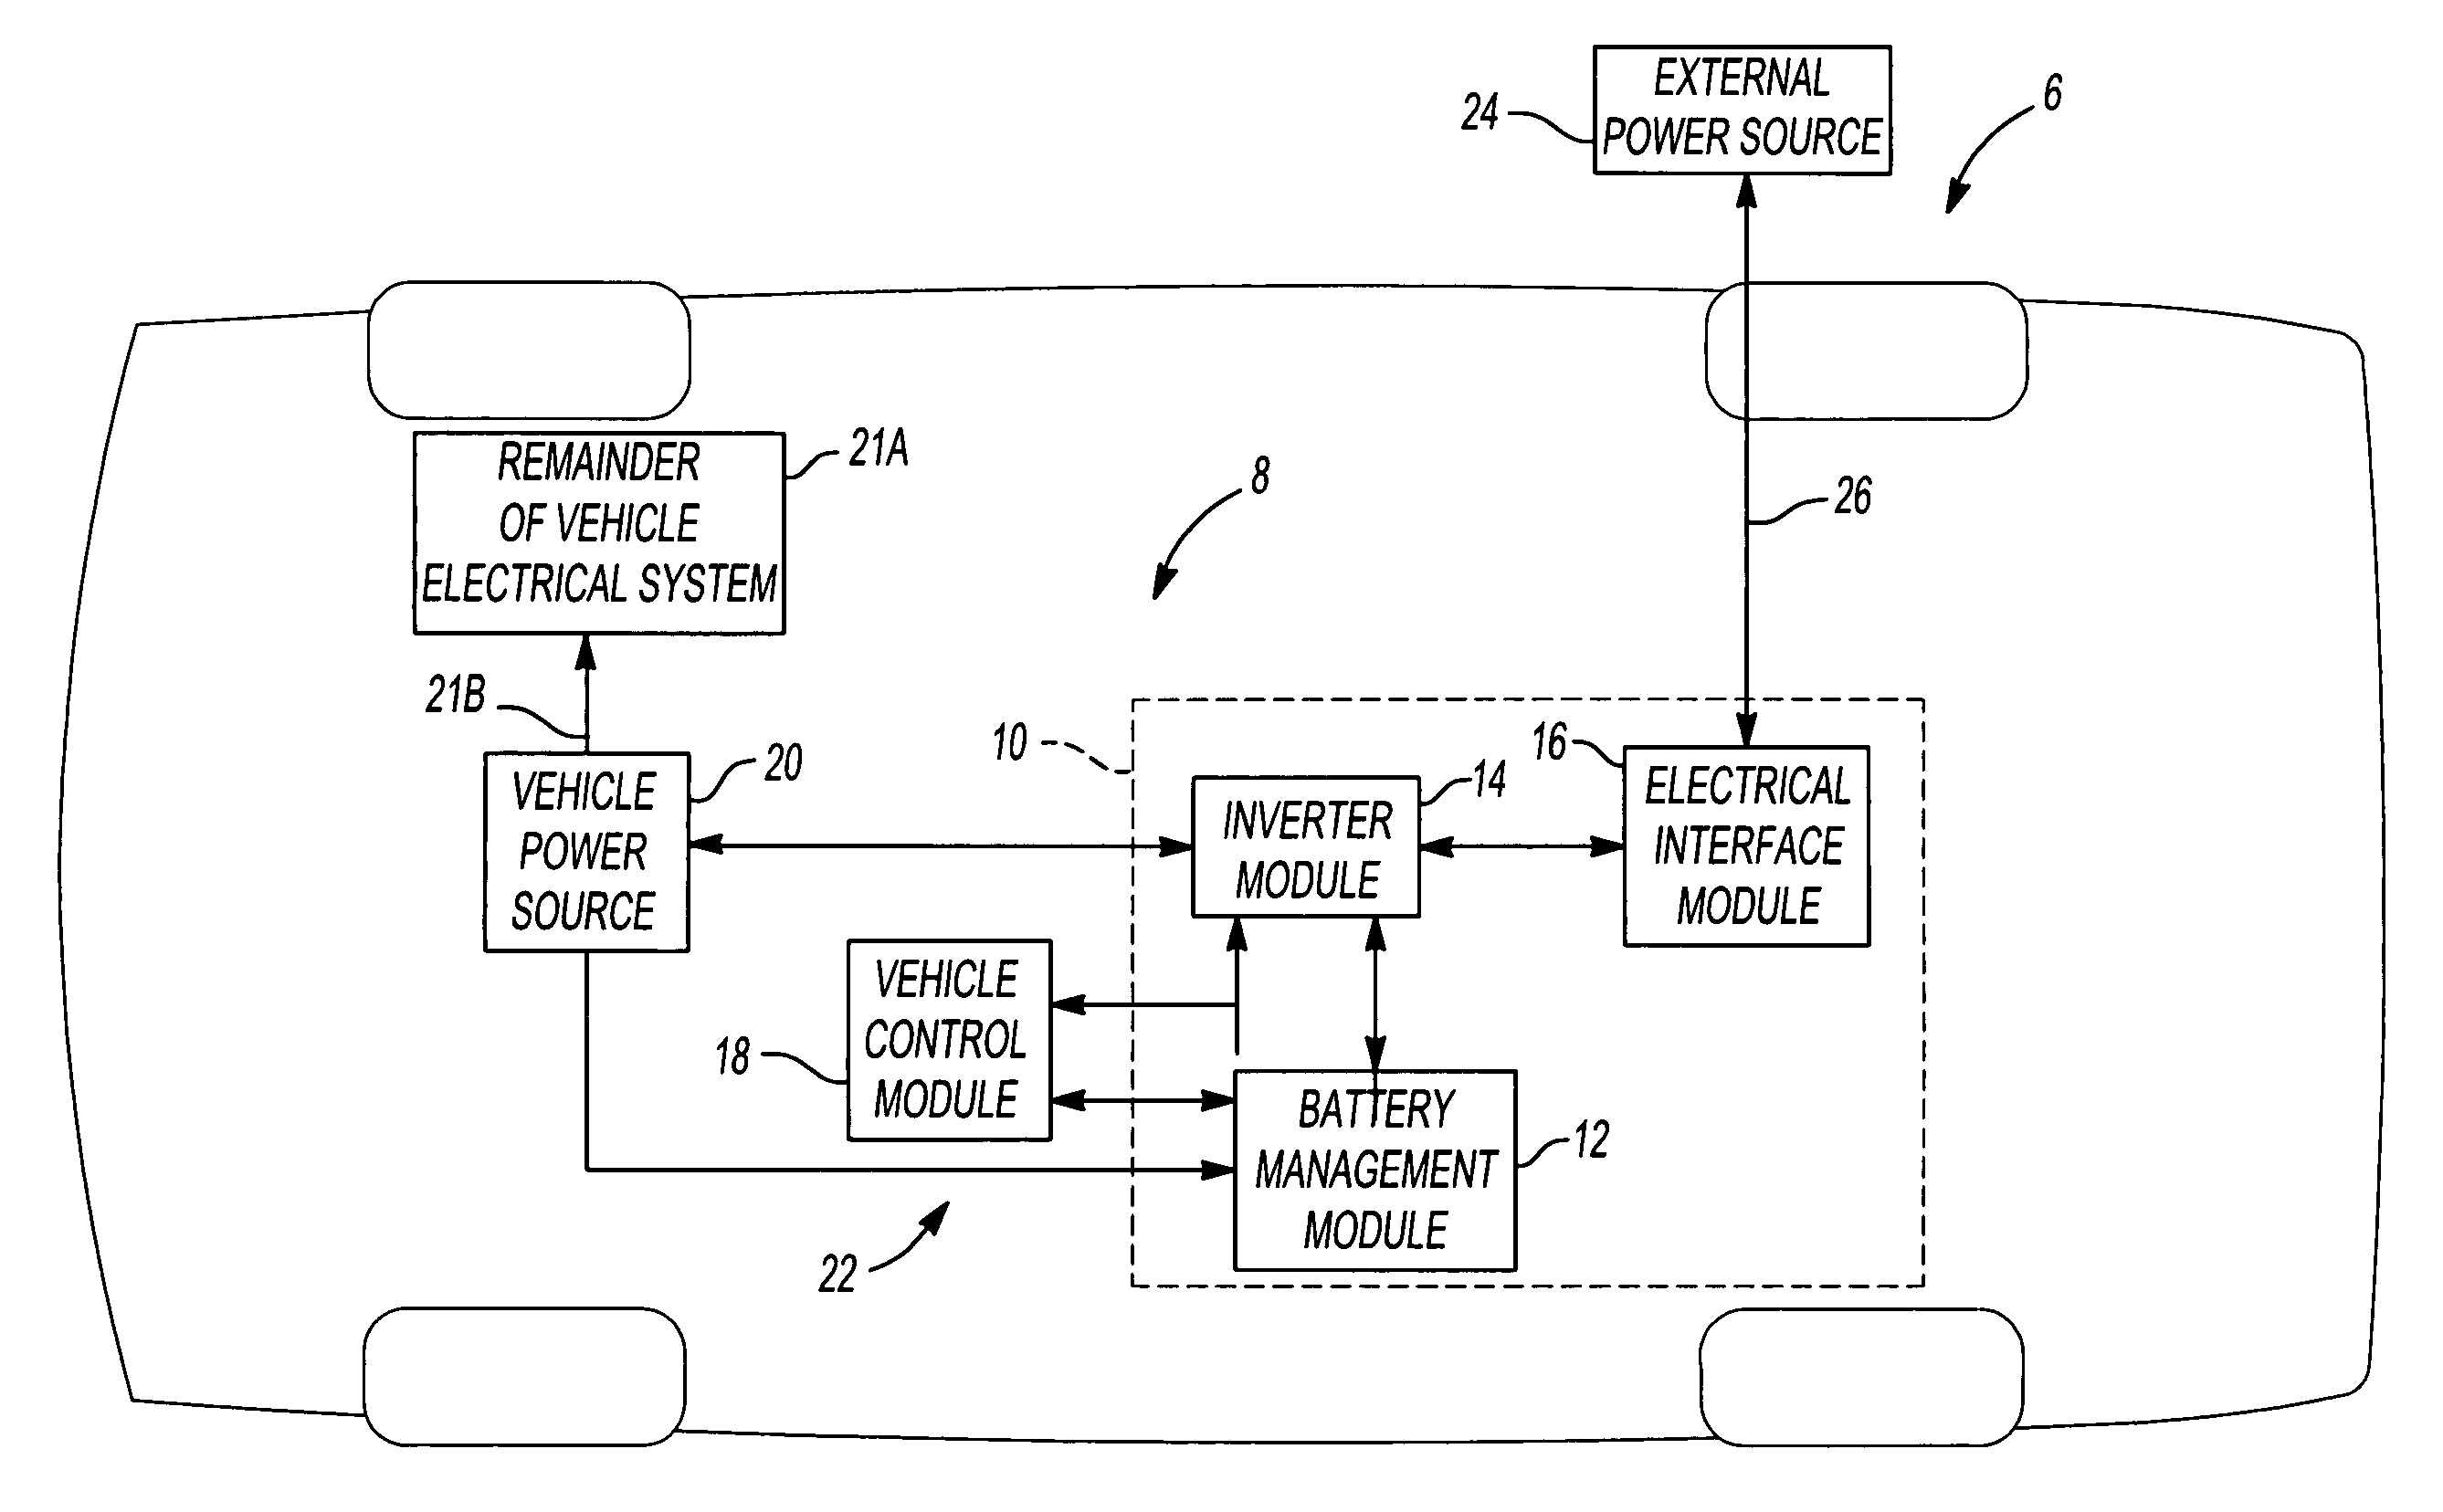 Bi-directional inverter control for high voltage charge/discharge for automobiles